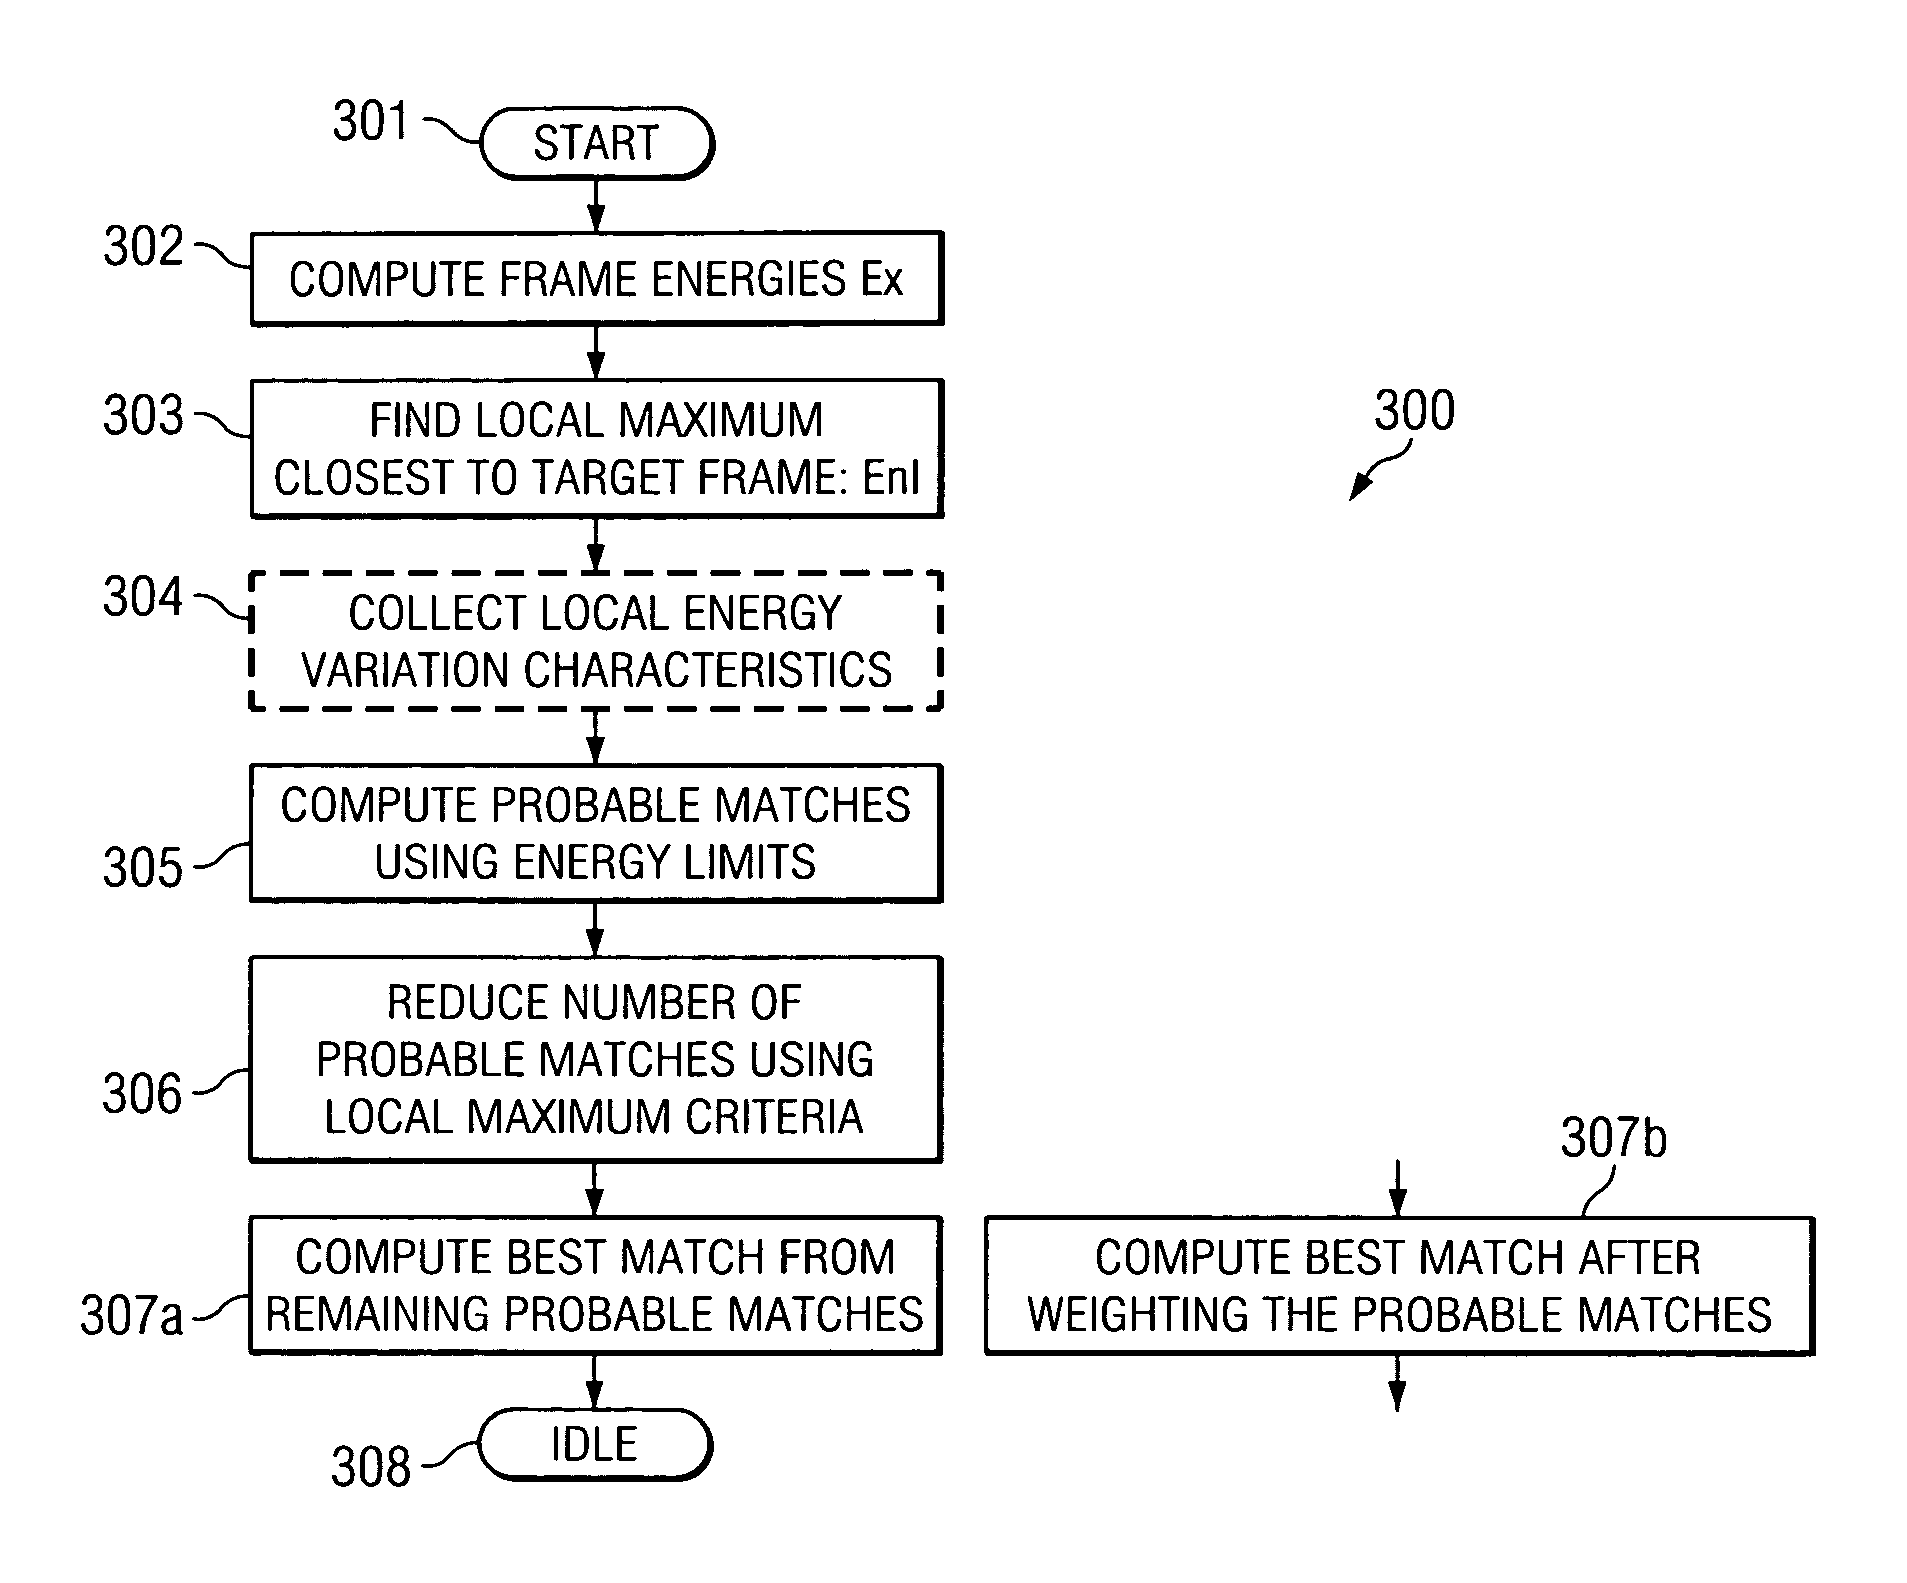 Energy-based audio pattern recognition with weighting of energy matches